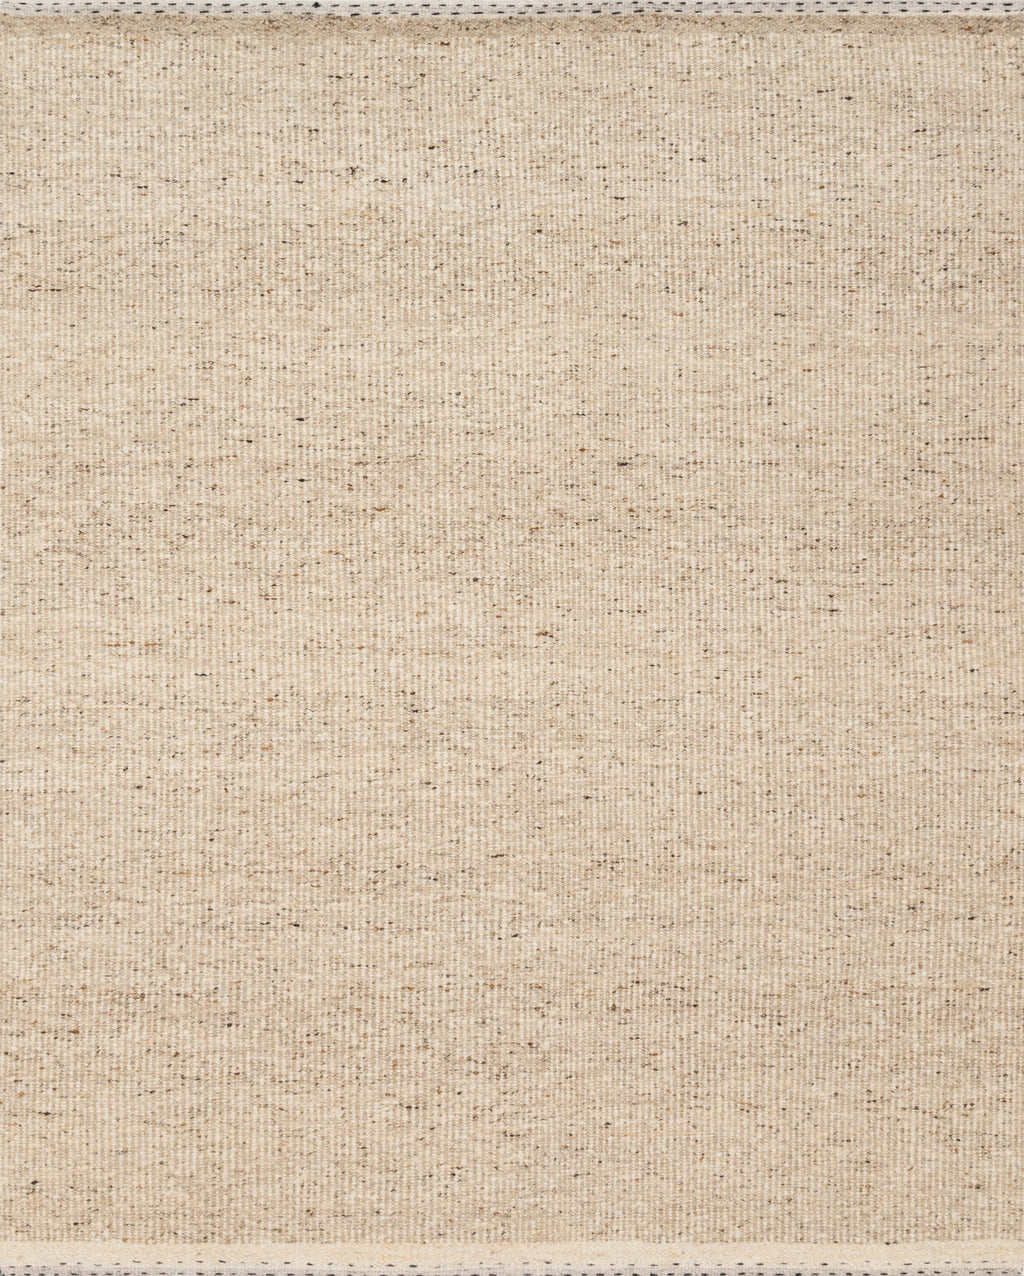 SLOANE Collection Rug  in  NATURAL Beige Small Hand-Woven Viscose/Acrylic